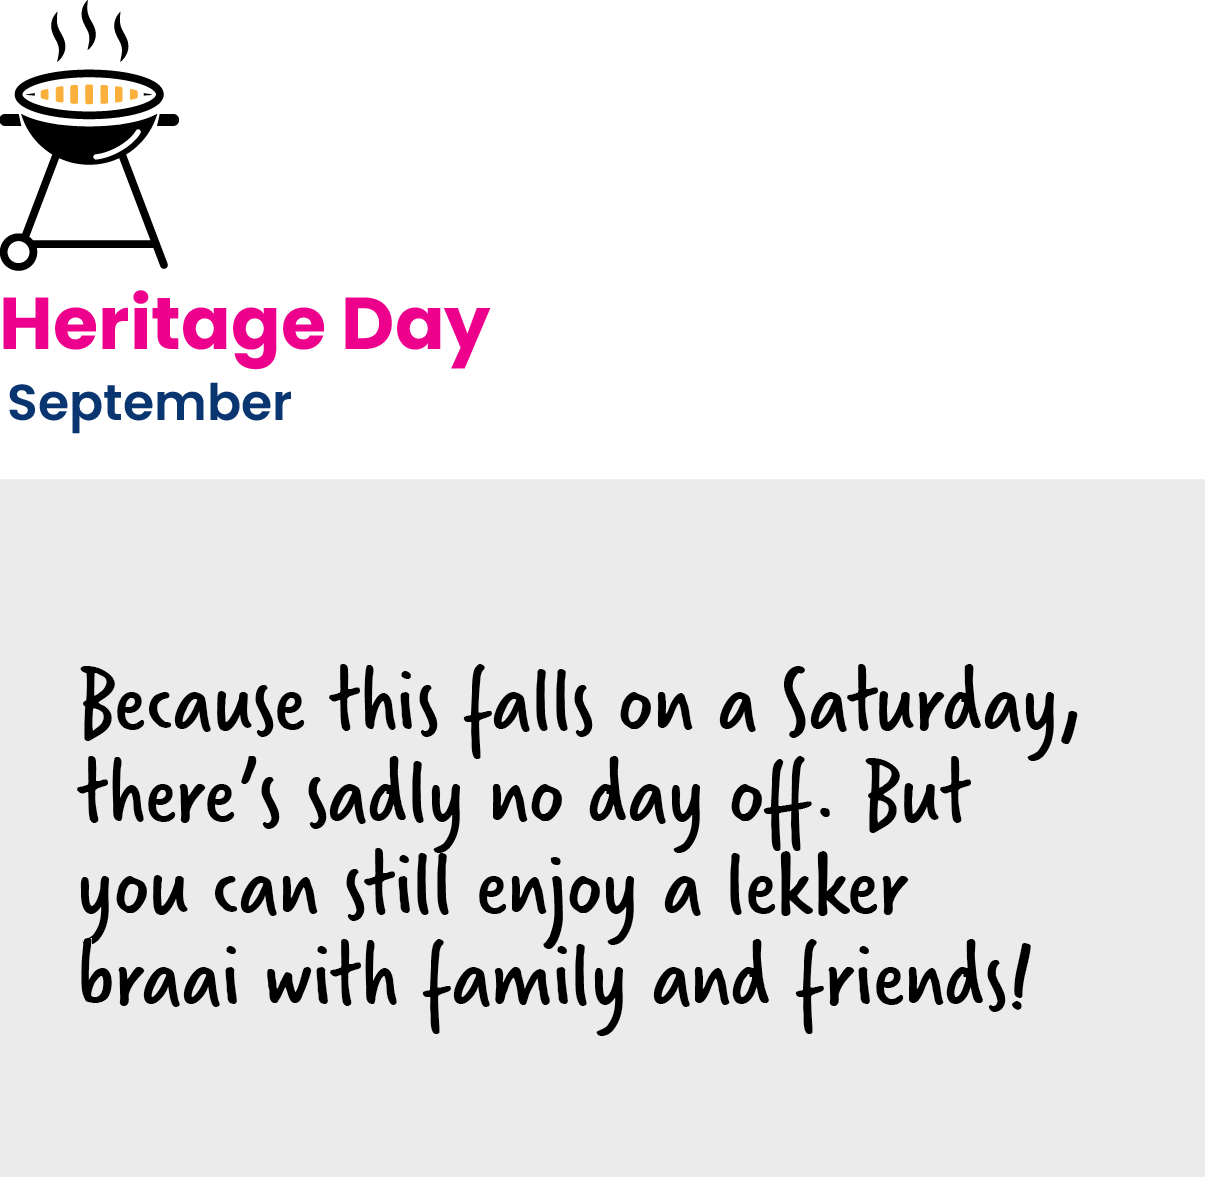 September 2022 - Heritage Day - Sadly there is no day off. But you can still enjoy a lekker braai with family and friends!